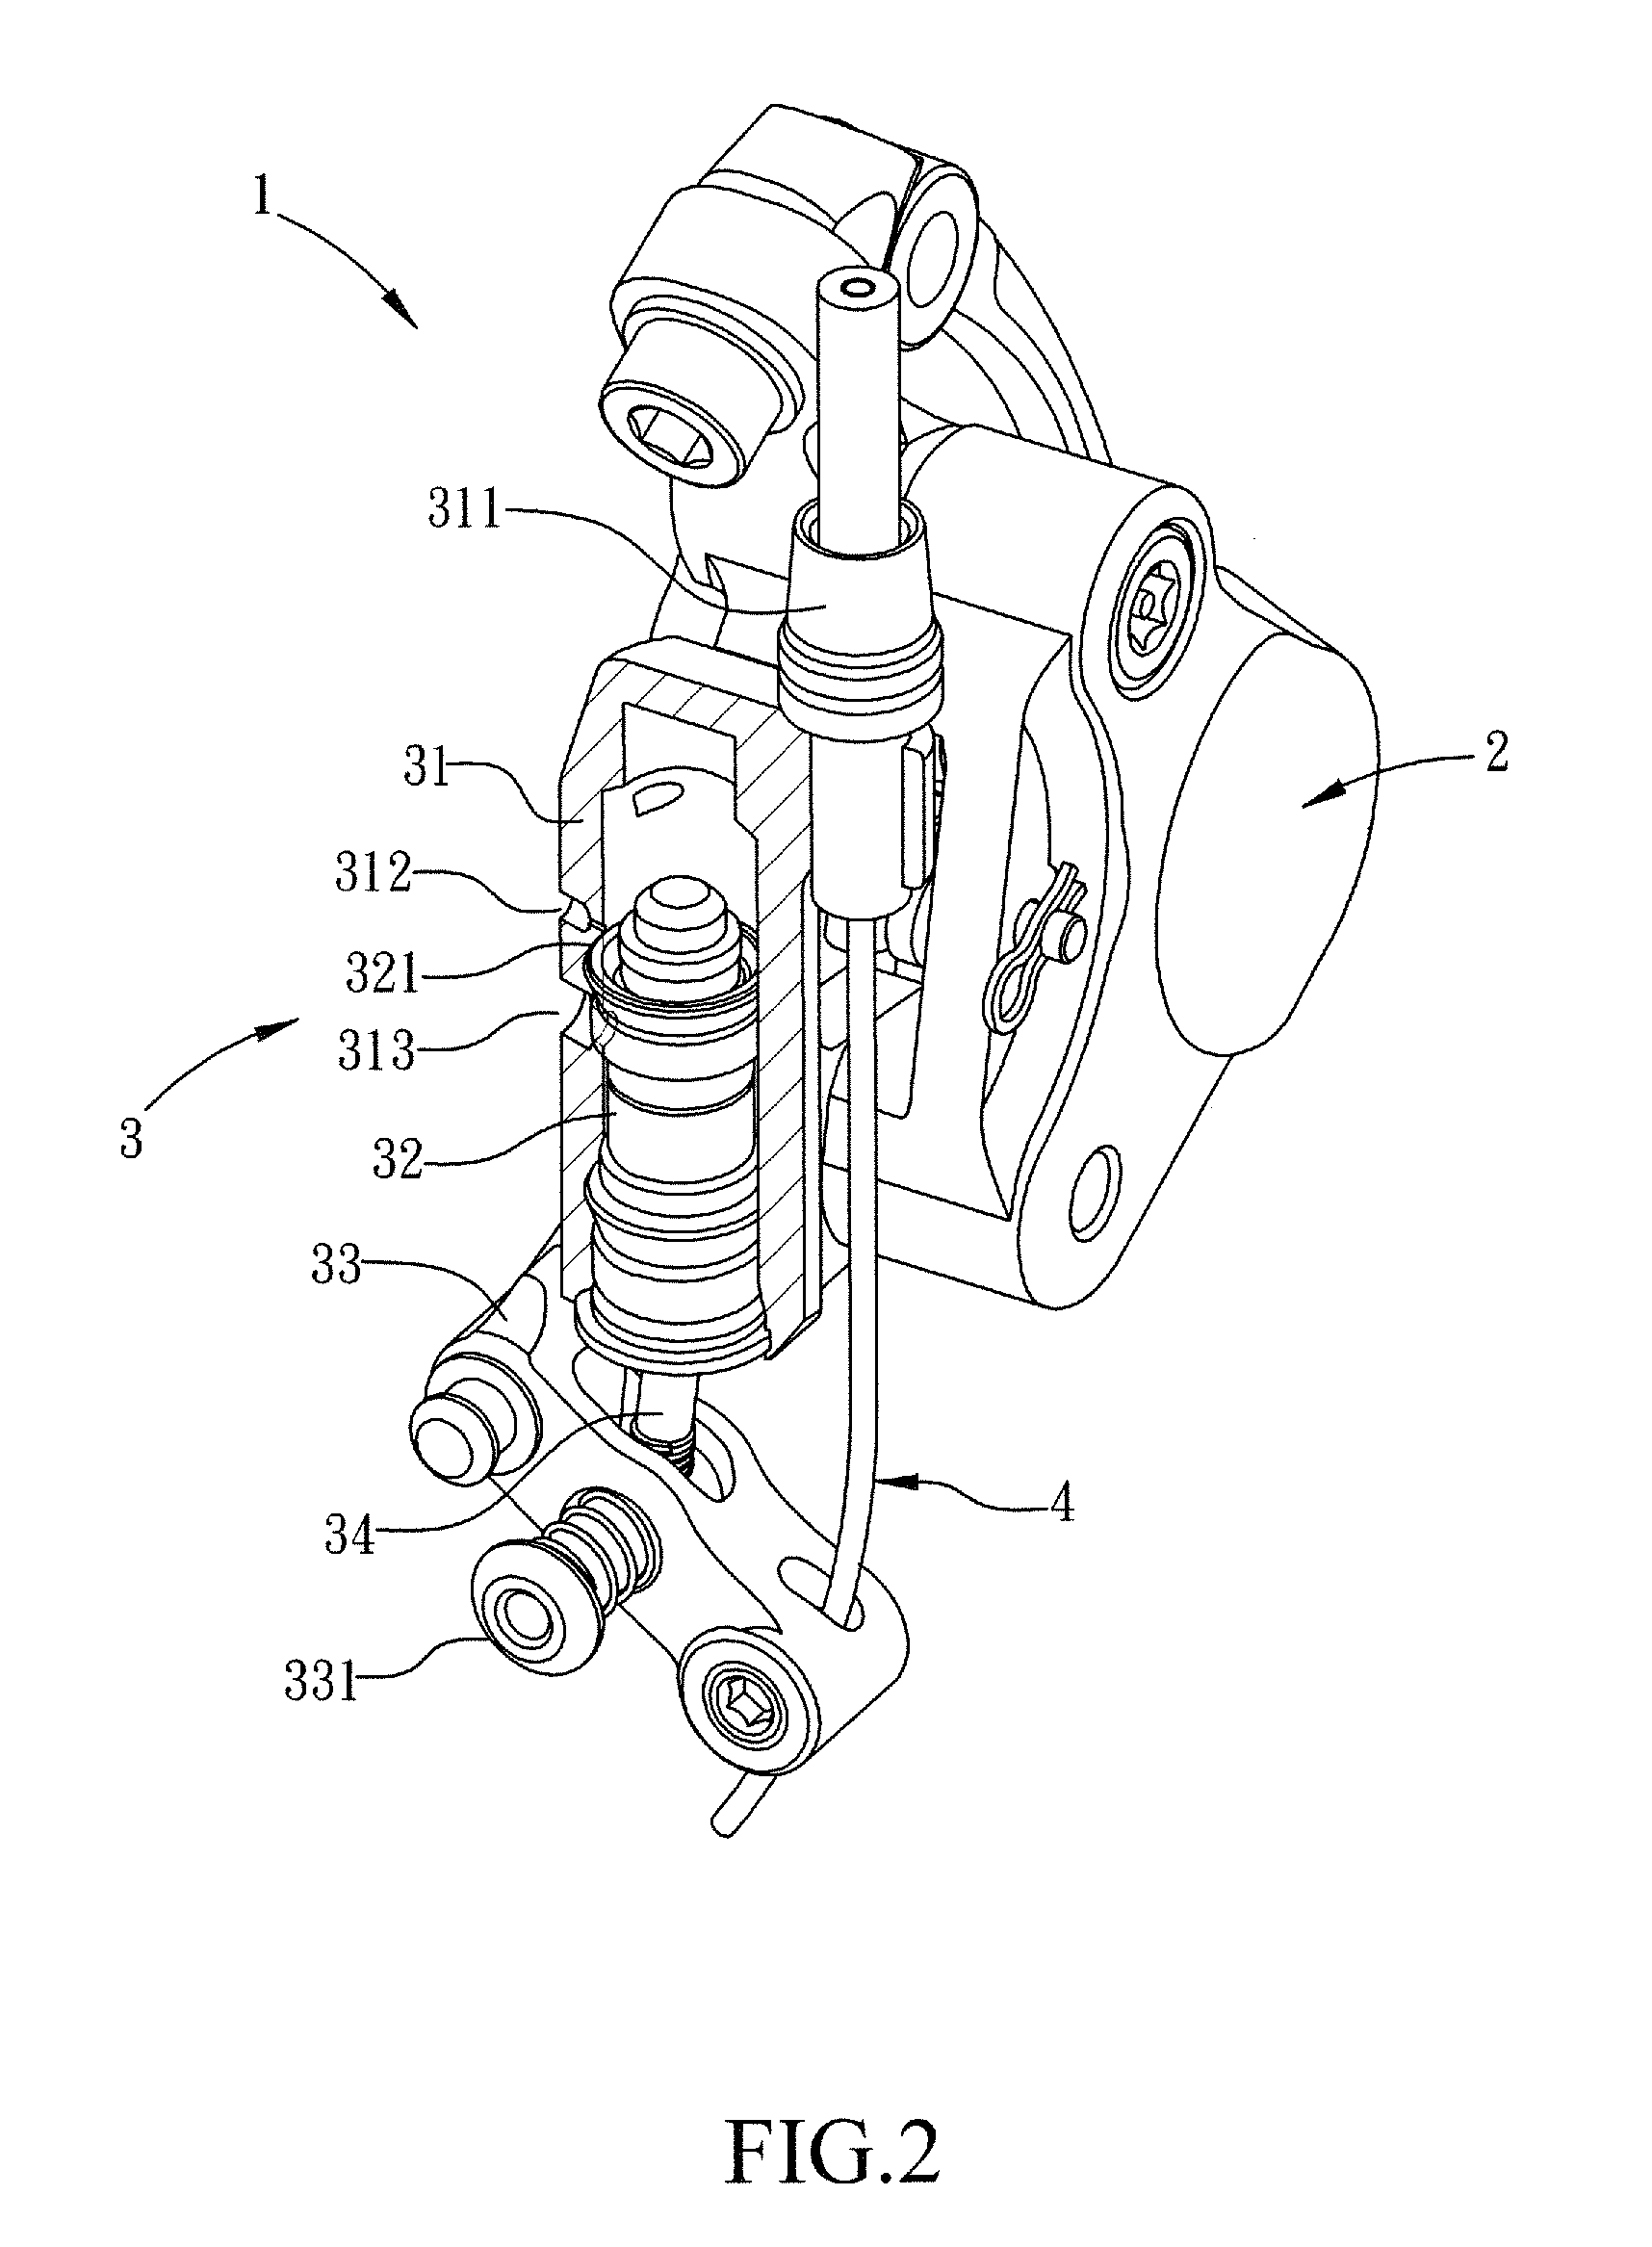 Control-by-wire hydraulic brake structure of bicycle